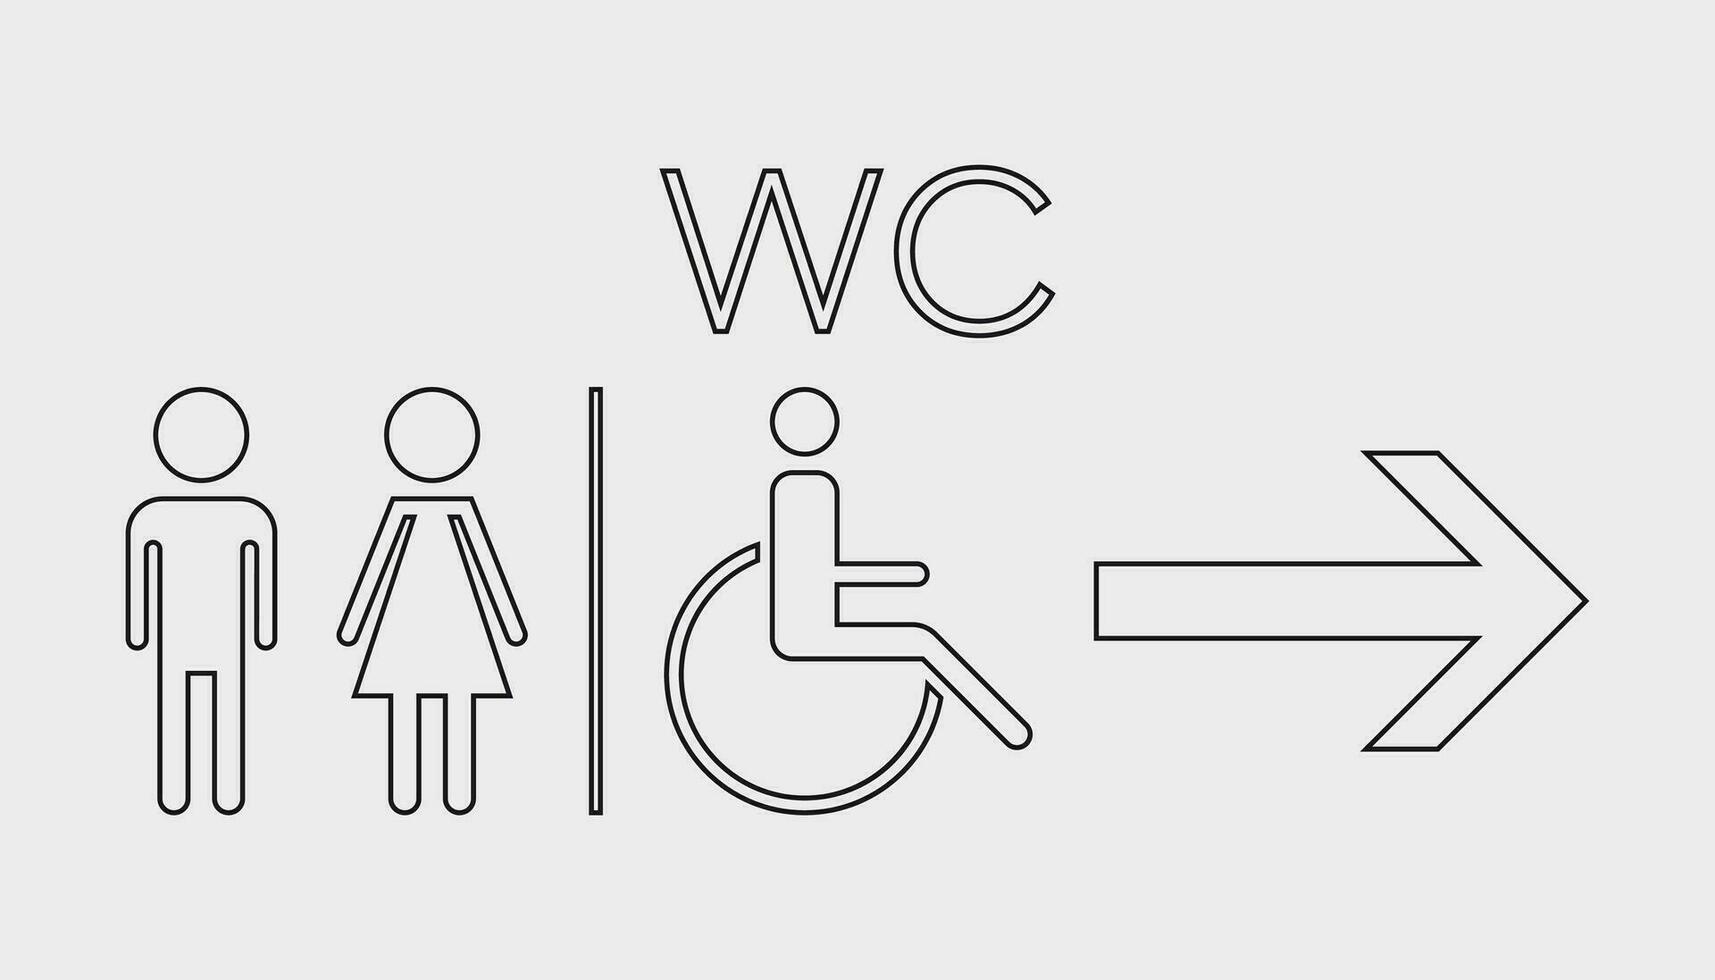 WC, toilet line vector icon . Men and women sign for restroom on white background.